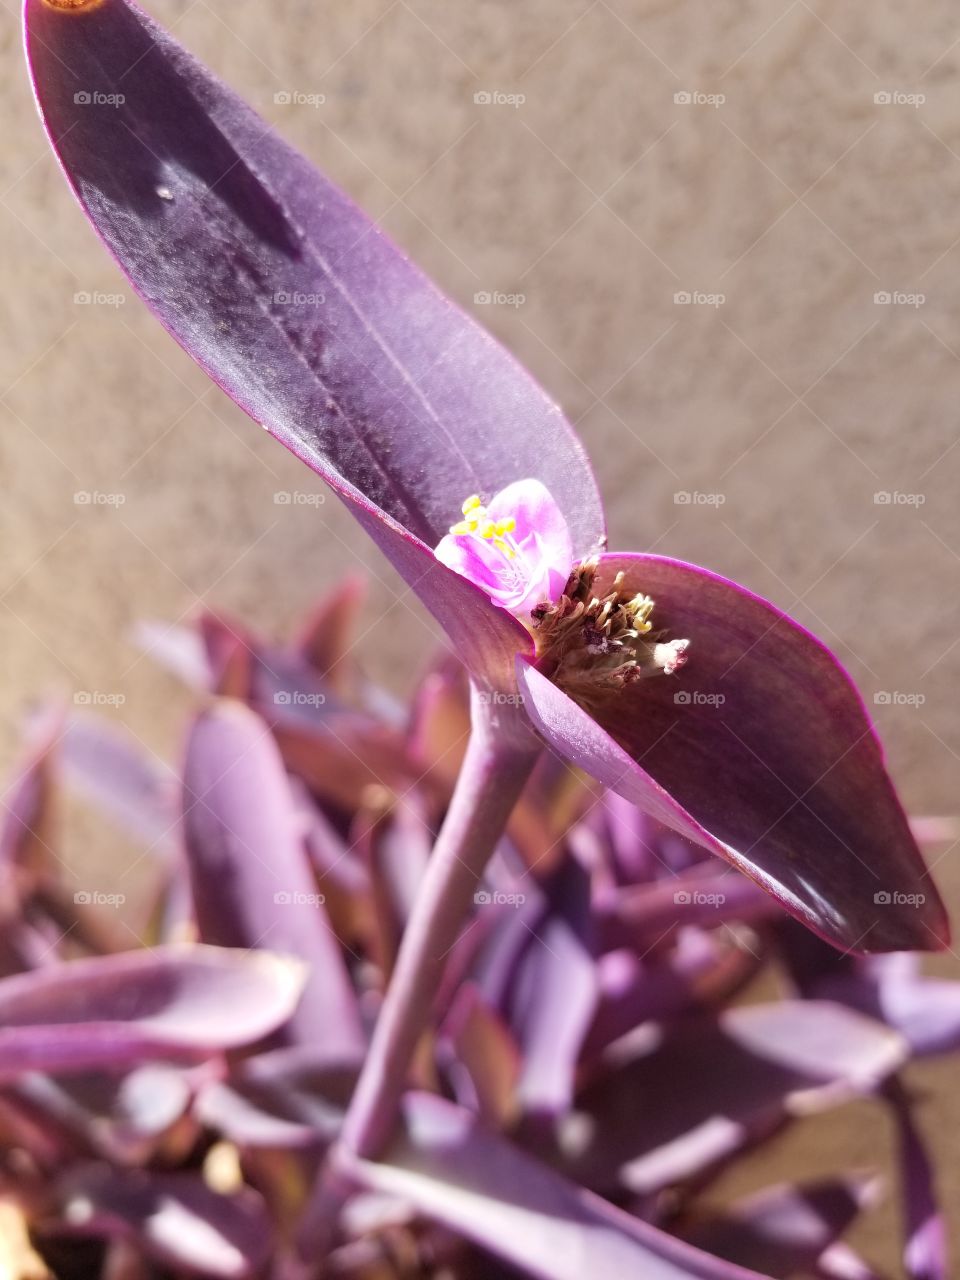 Purple color plant with small delicate flower. Blooms all year long.